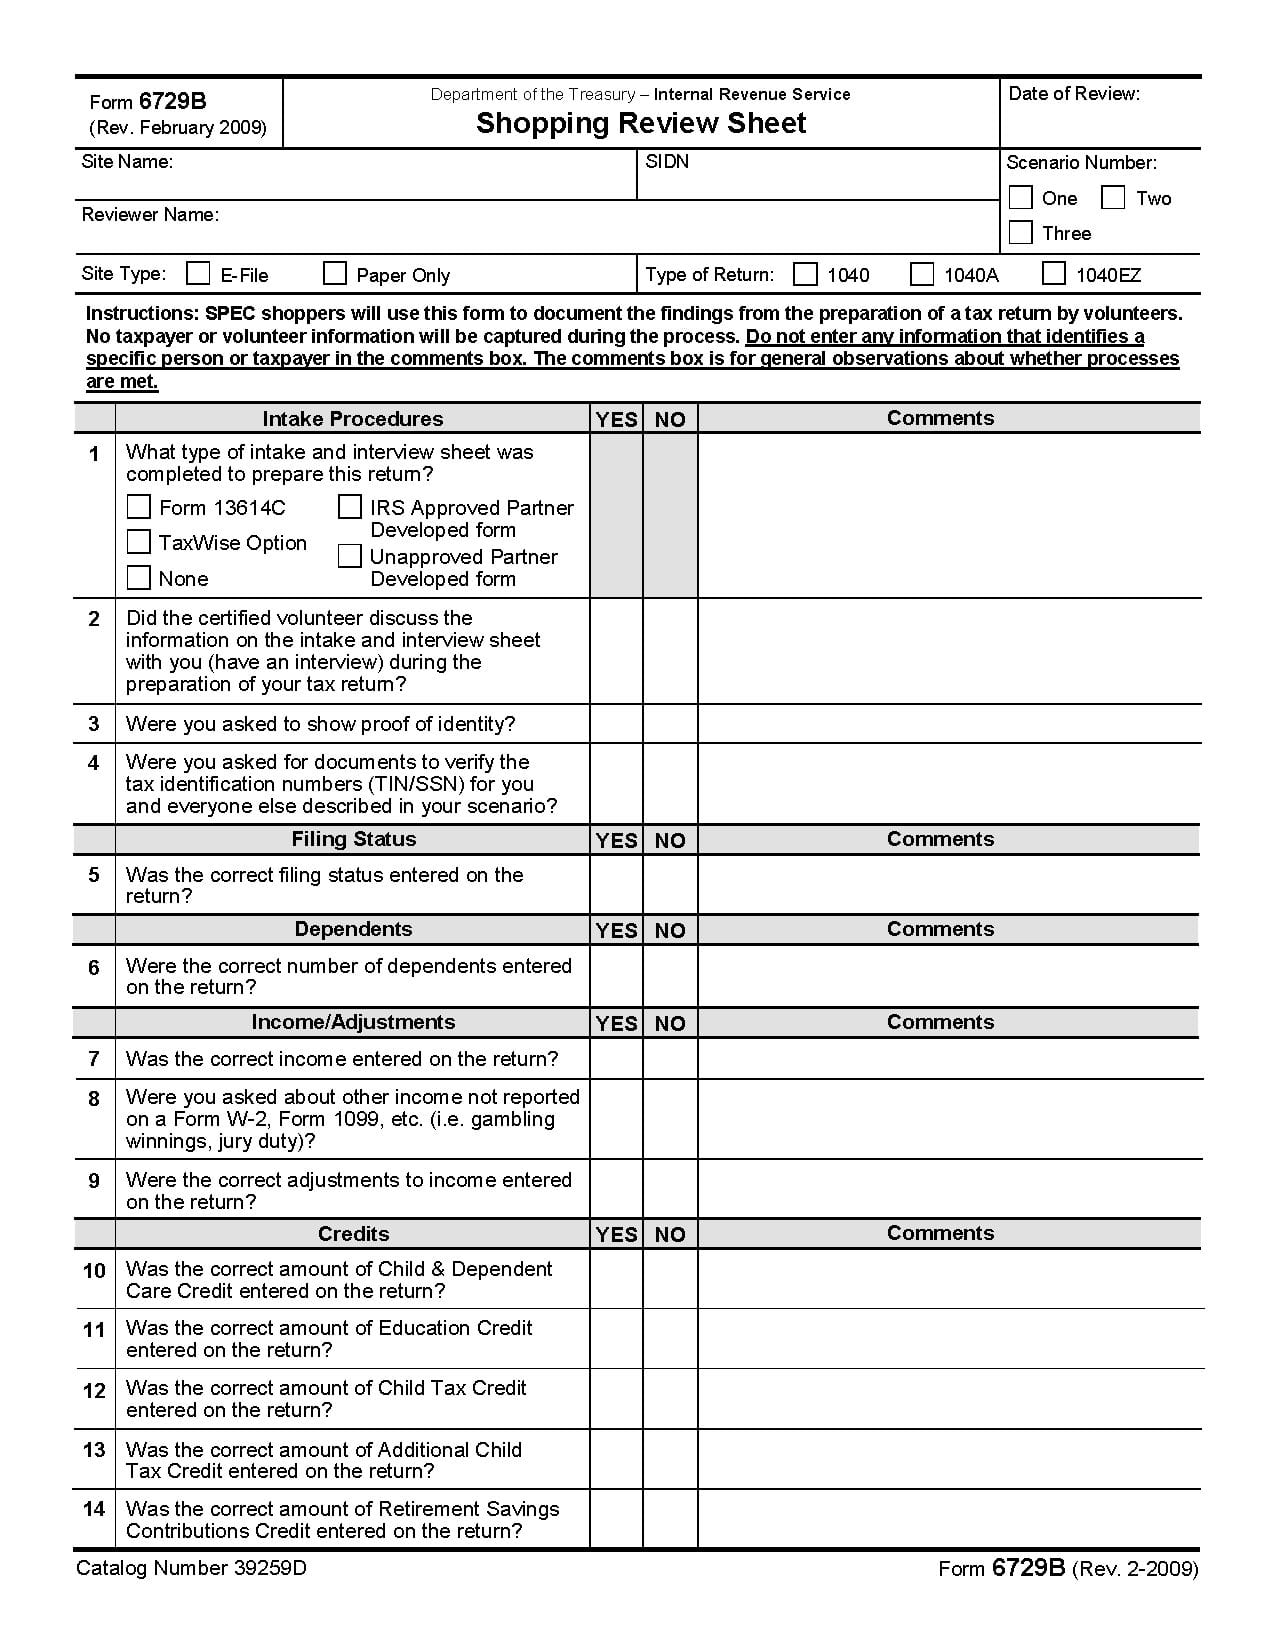 Tax Return Review Template